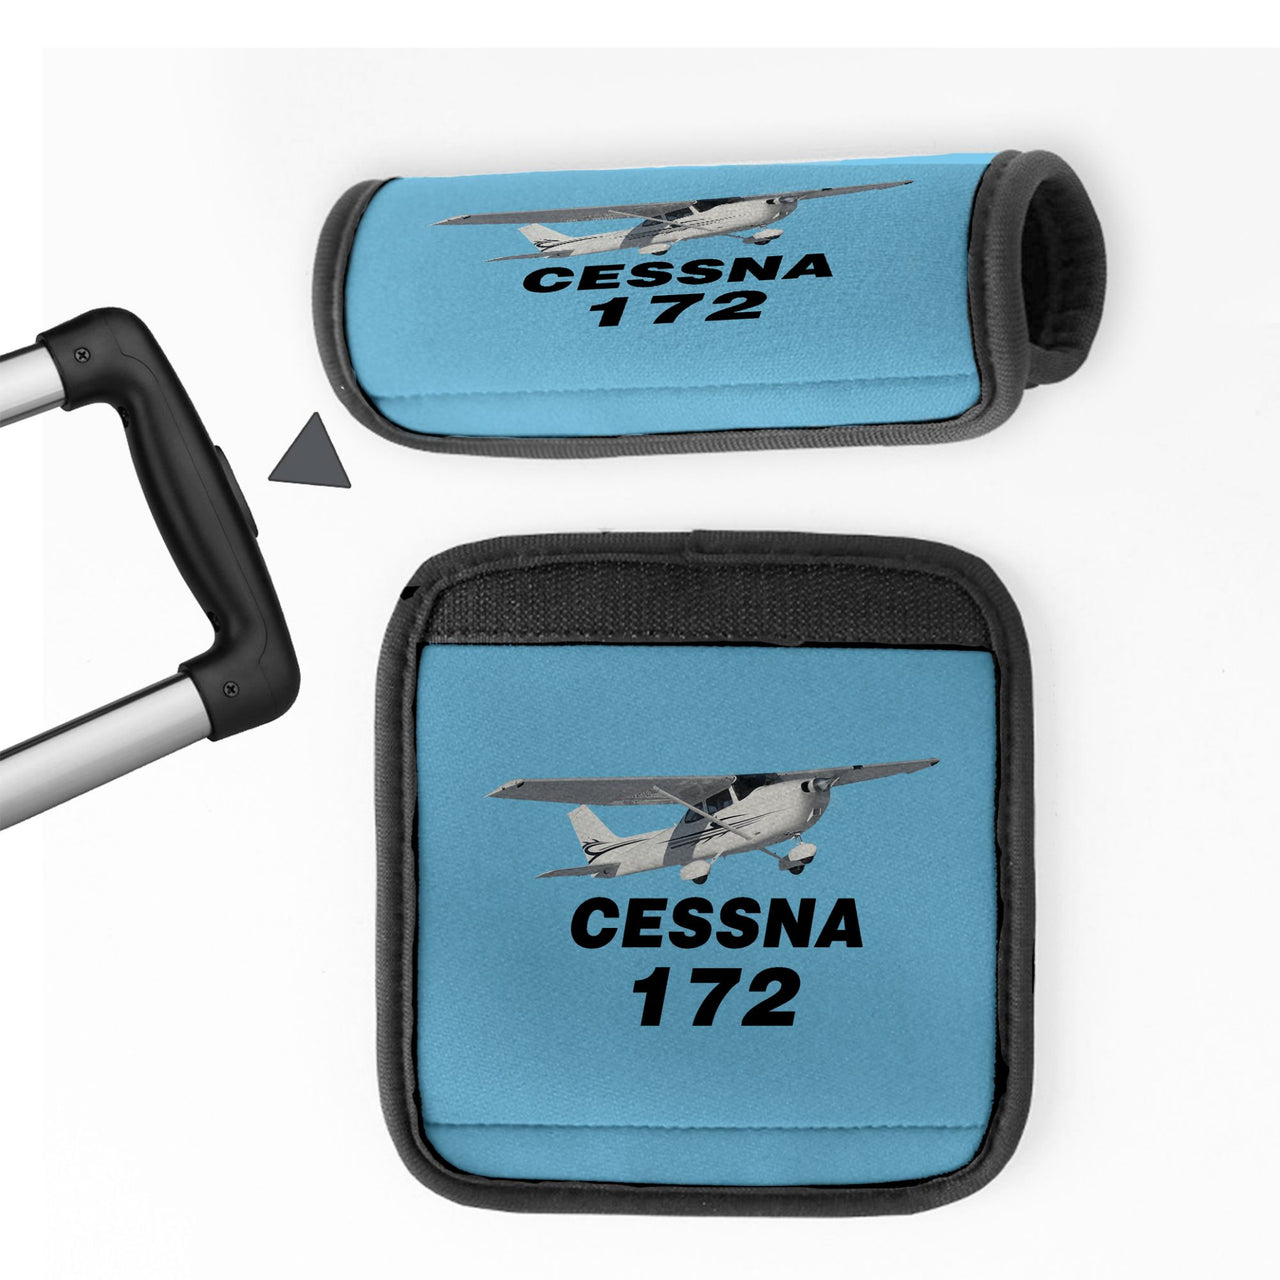 The Cessna 172 Designed Neoprene Luggage Handle Covers